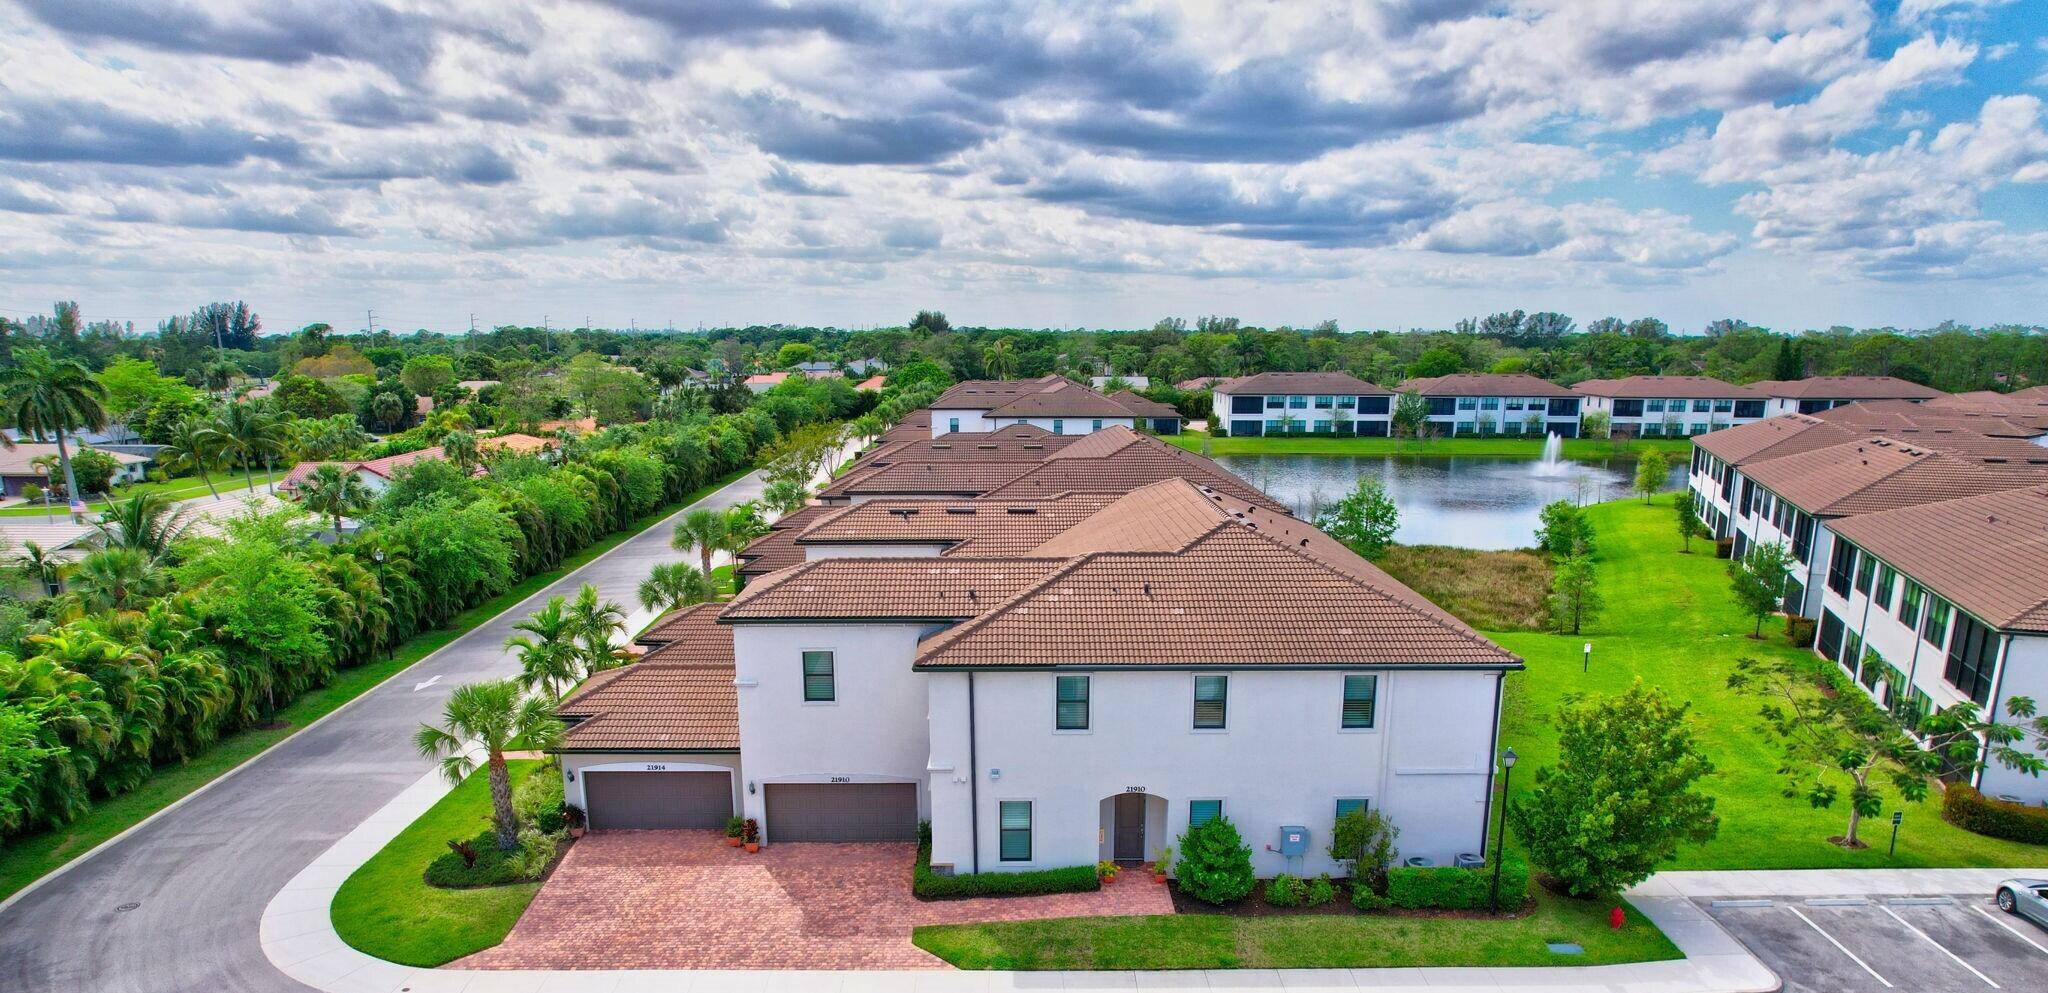 This stunning home, located in the vibrant Boca Flores community, offers a blend of modern elegance and comfort.